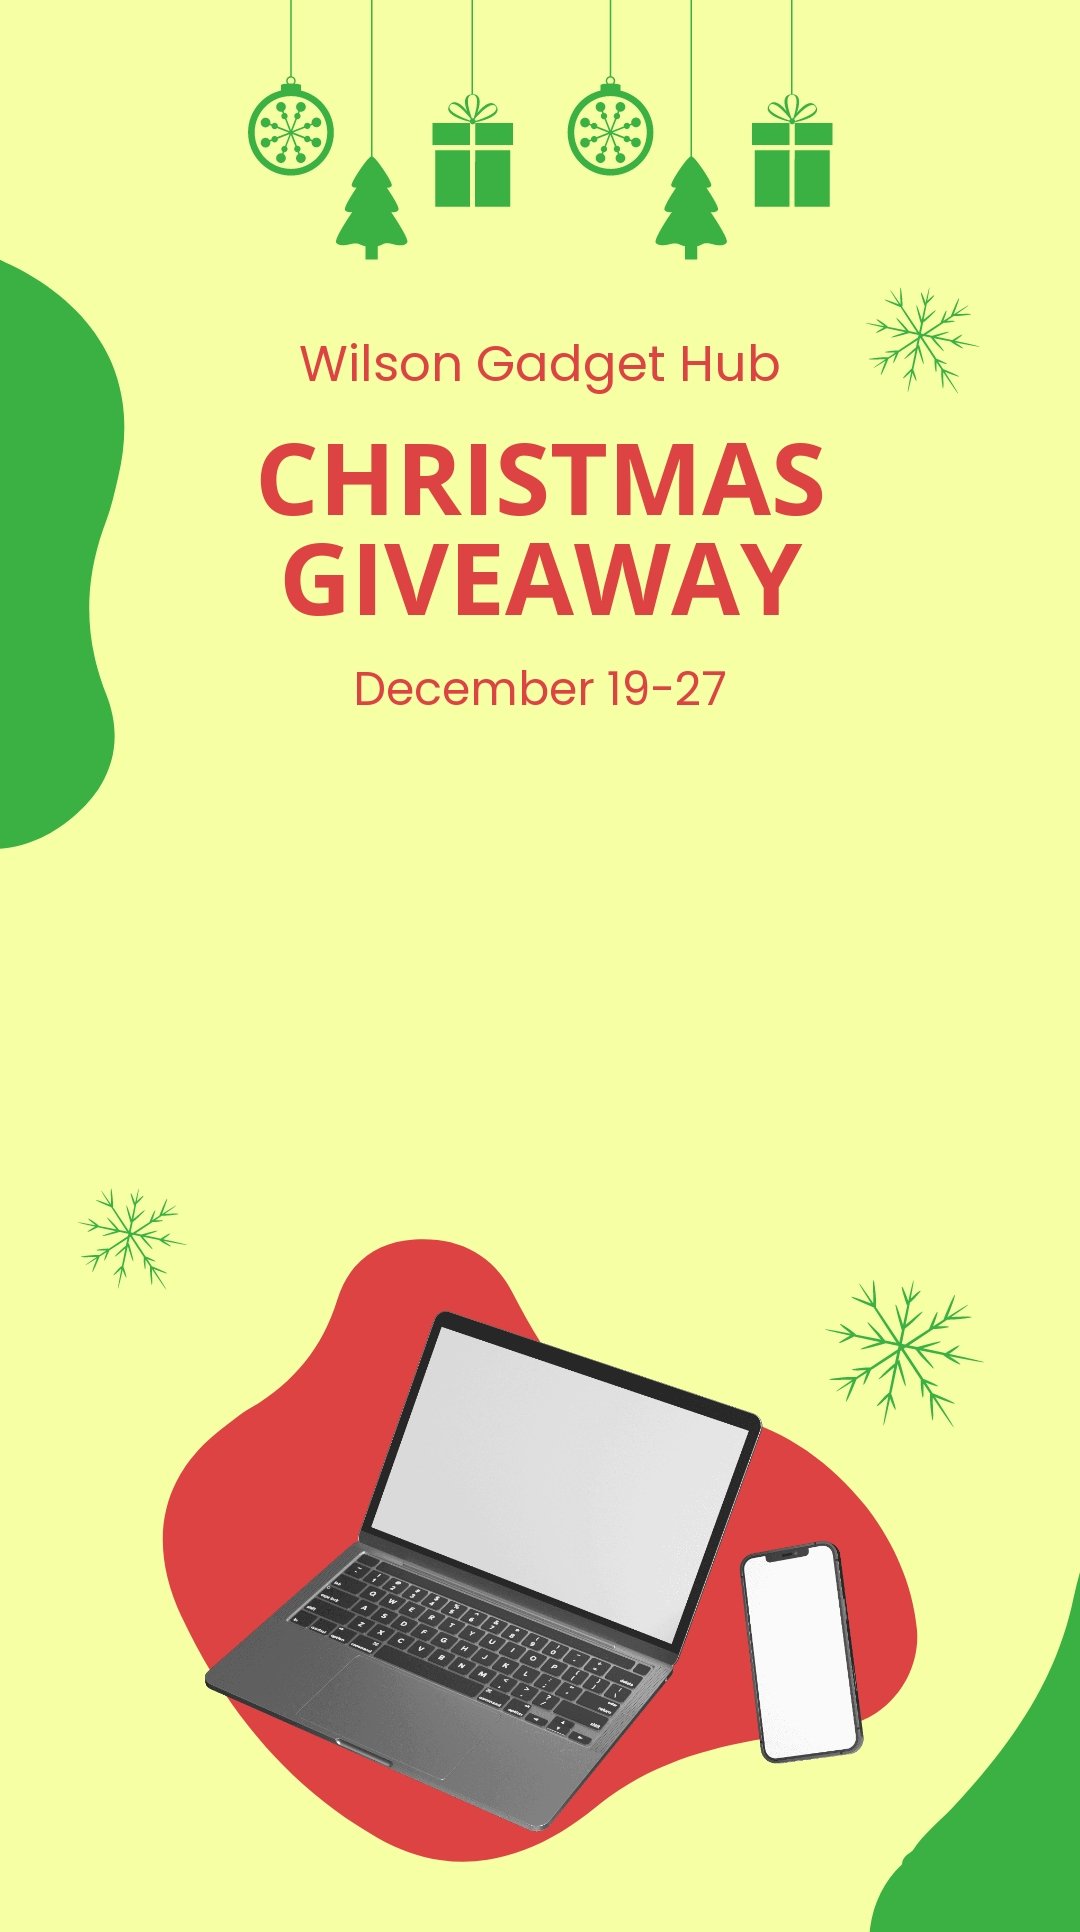 Christmas Giveaway Snapchat Geofilter